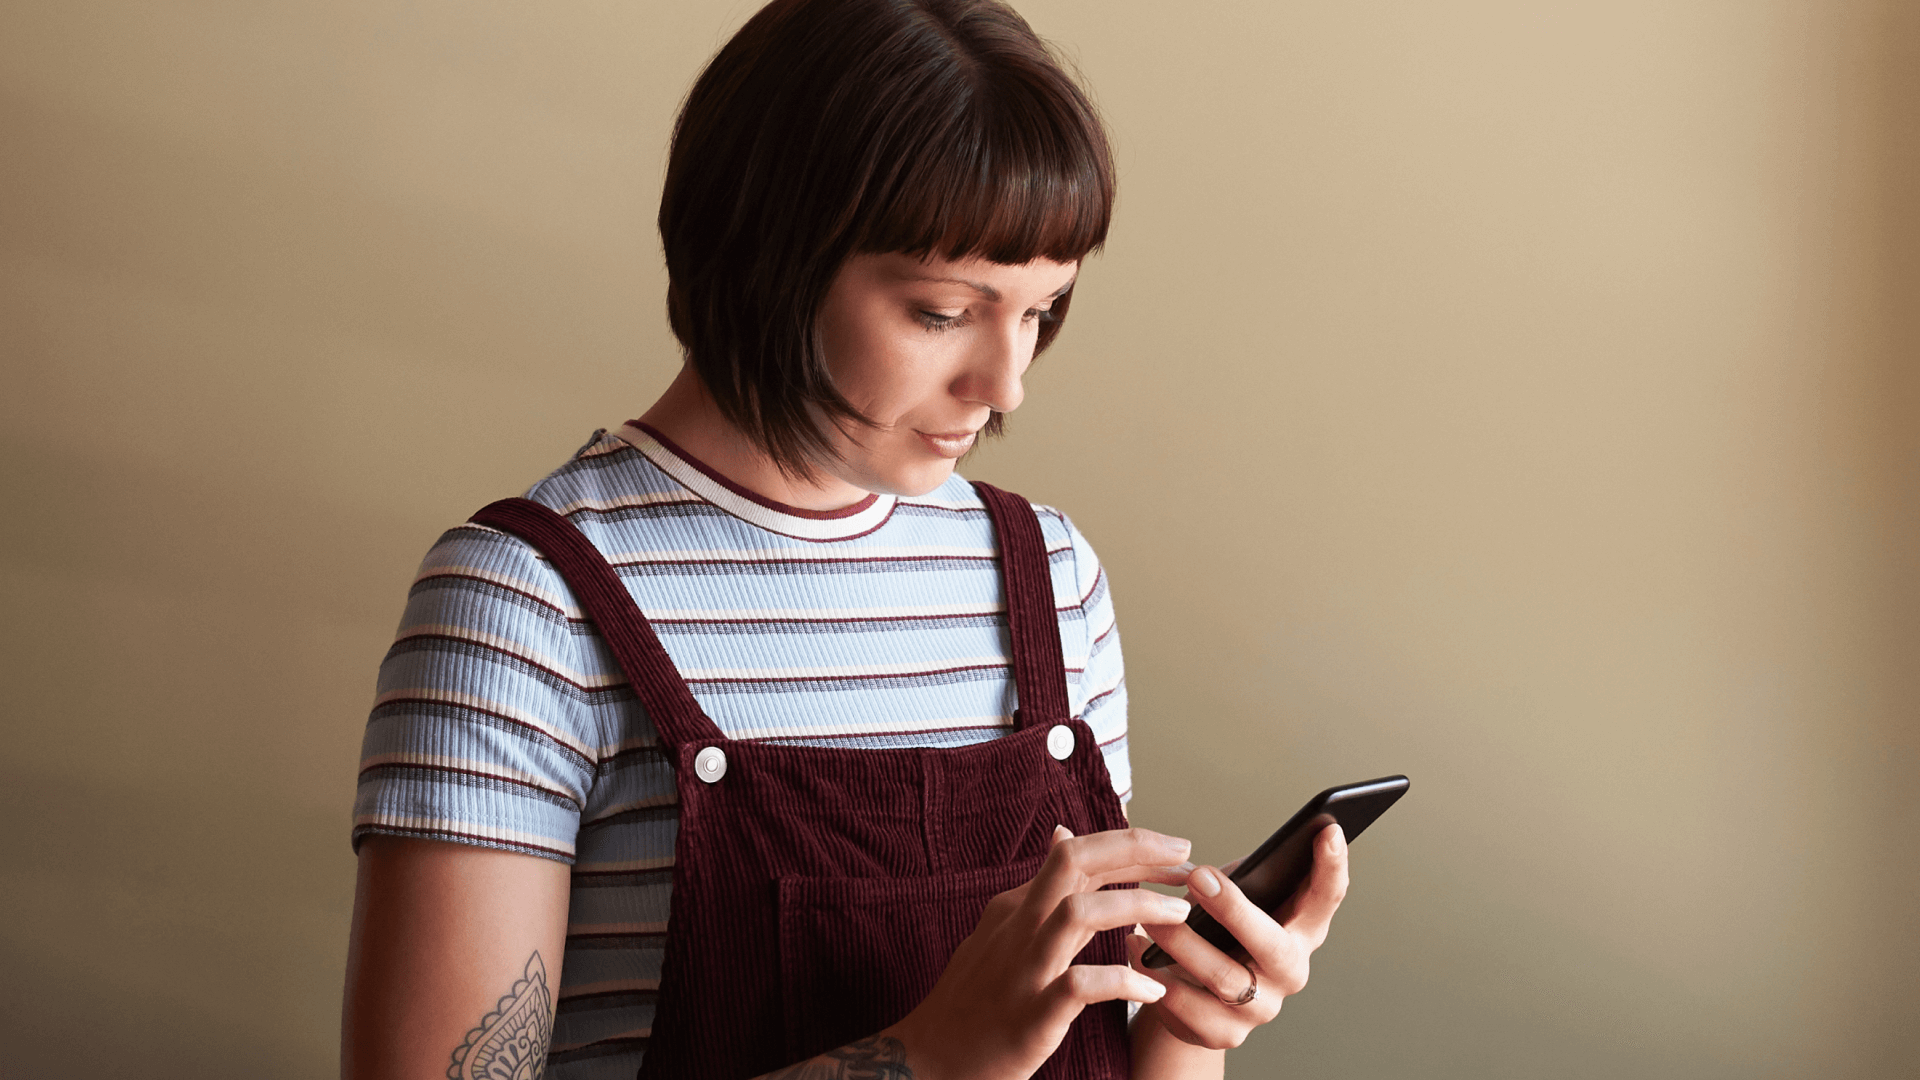 Image featuring a young woman with short hair, wearing a jumpsuit, looking at her phone.